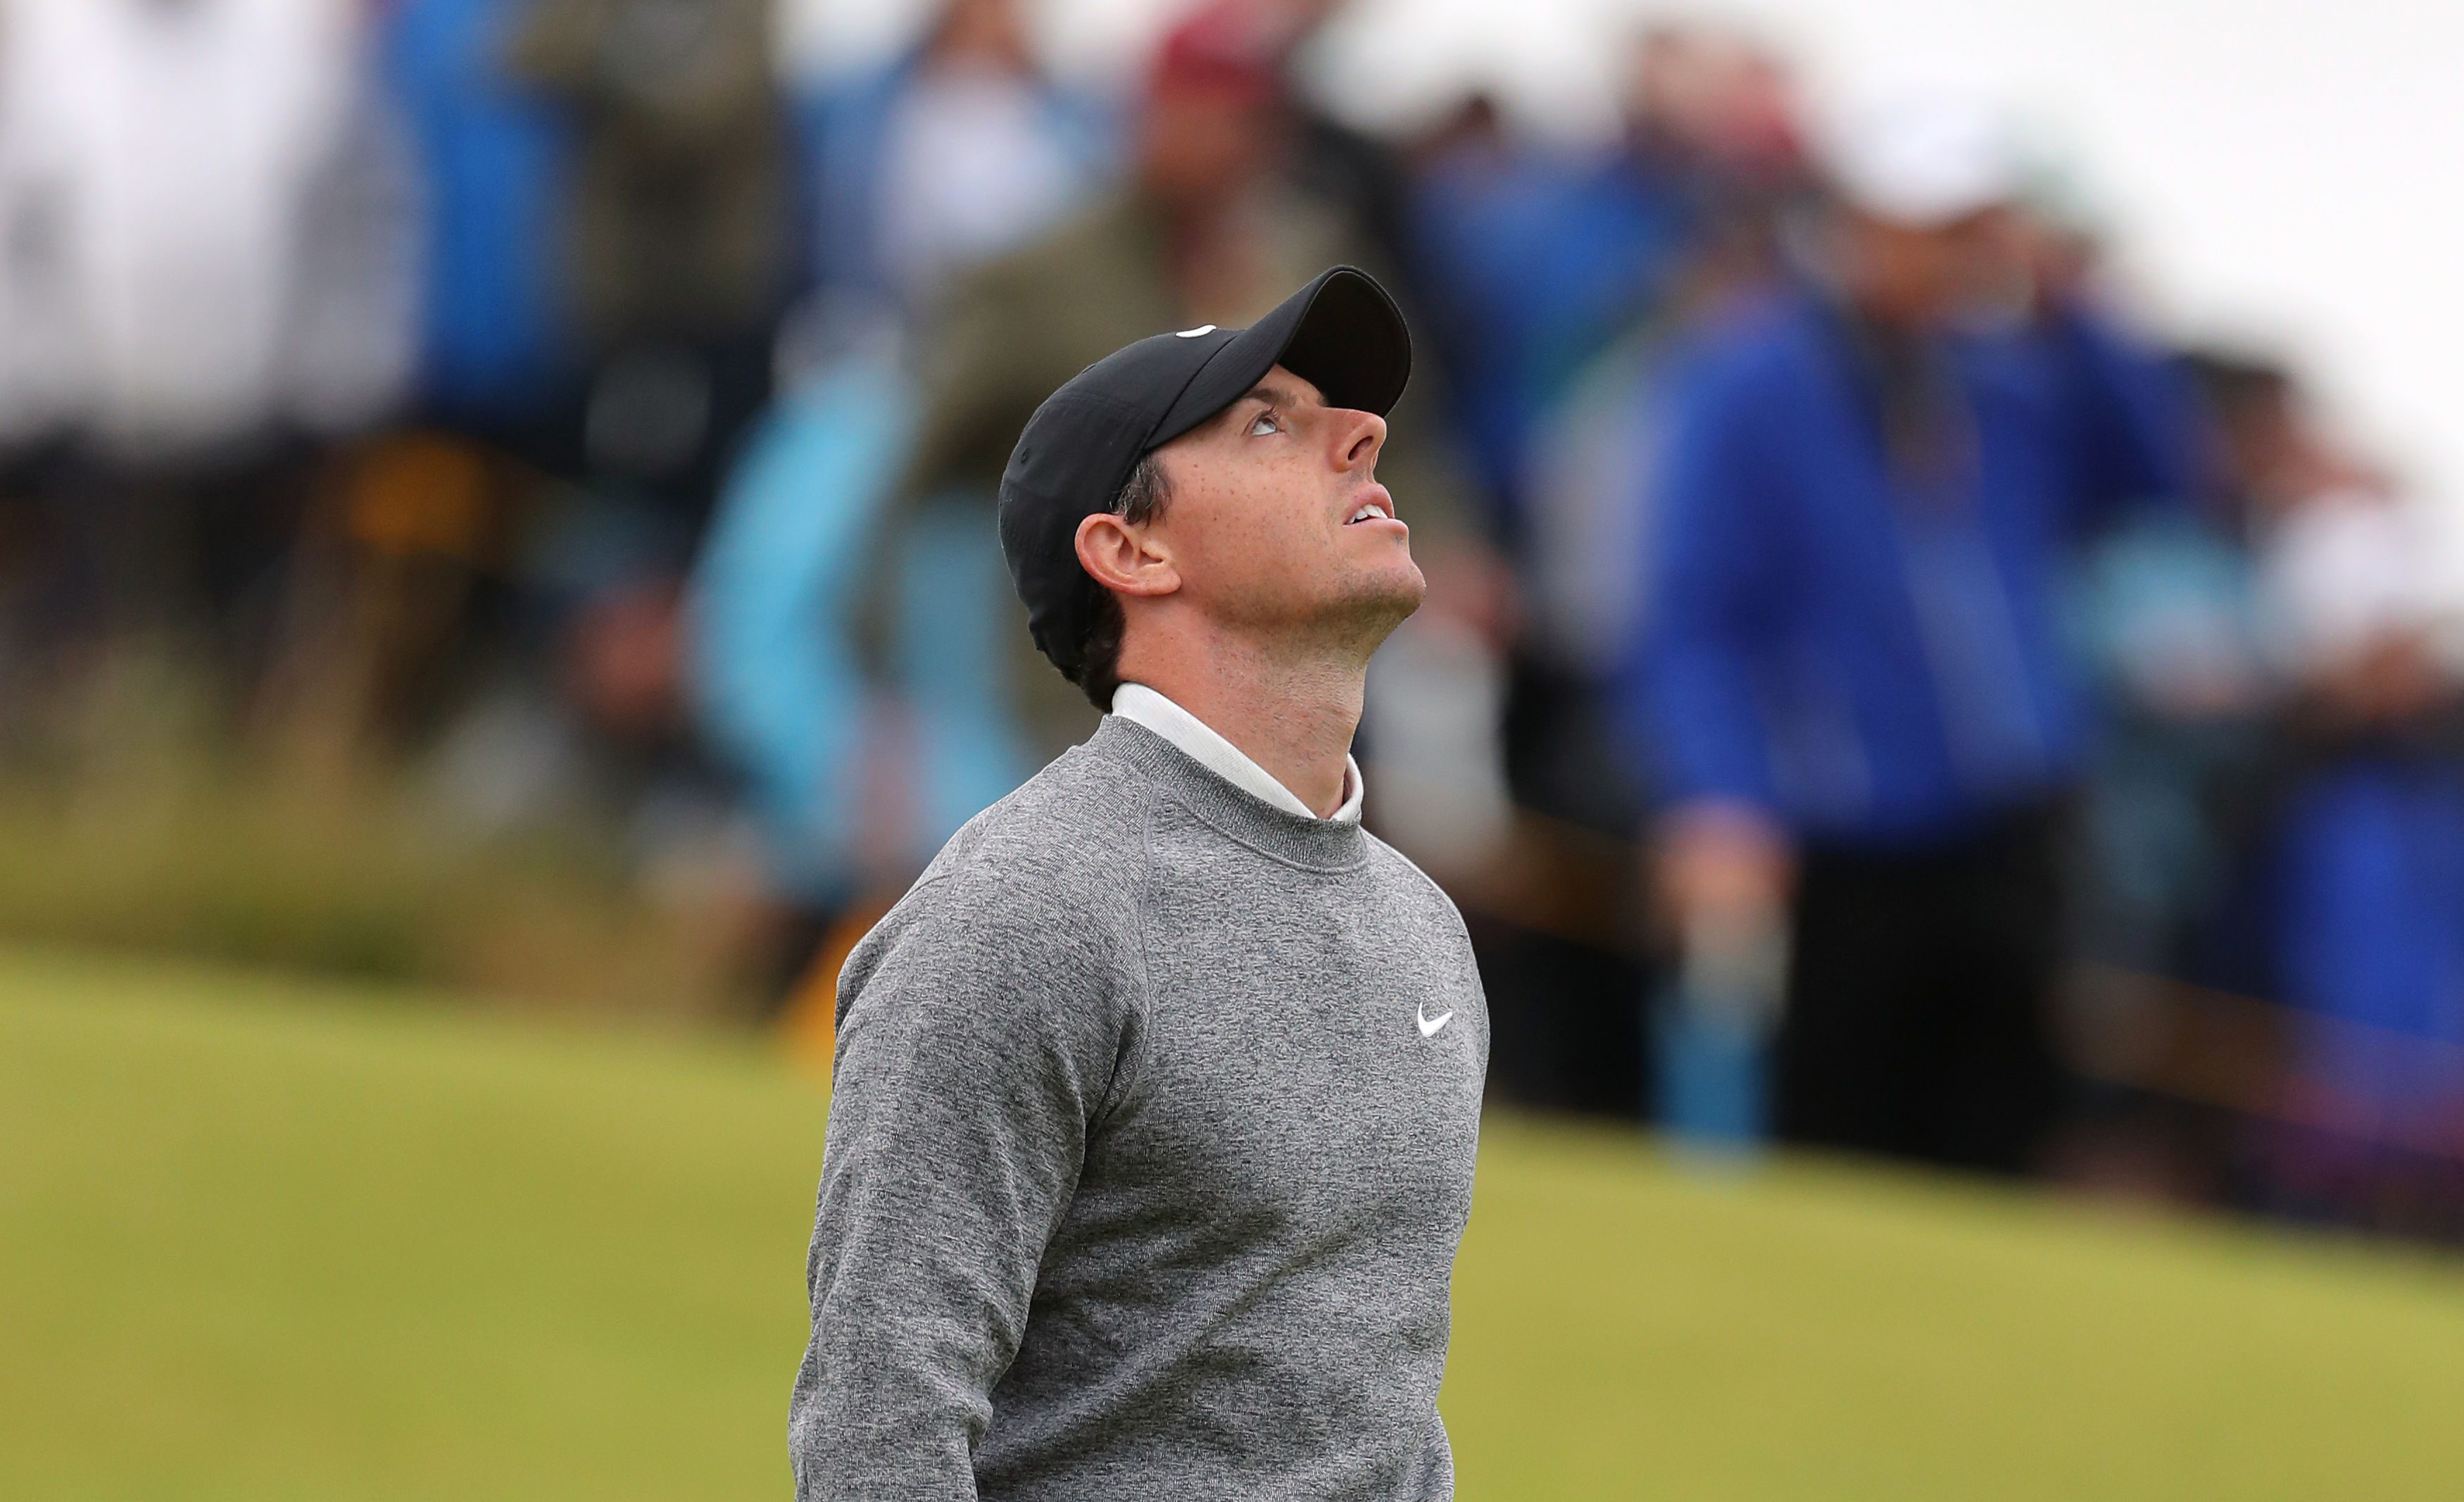 Rory McIlroy reacts emotionally to a missed putt during his final round comeback.